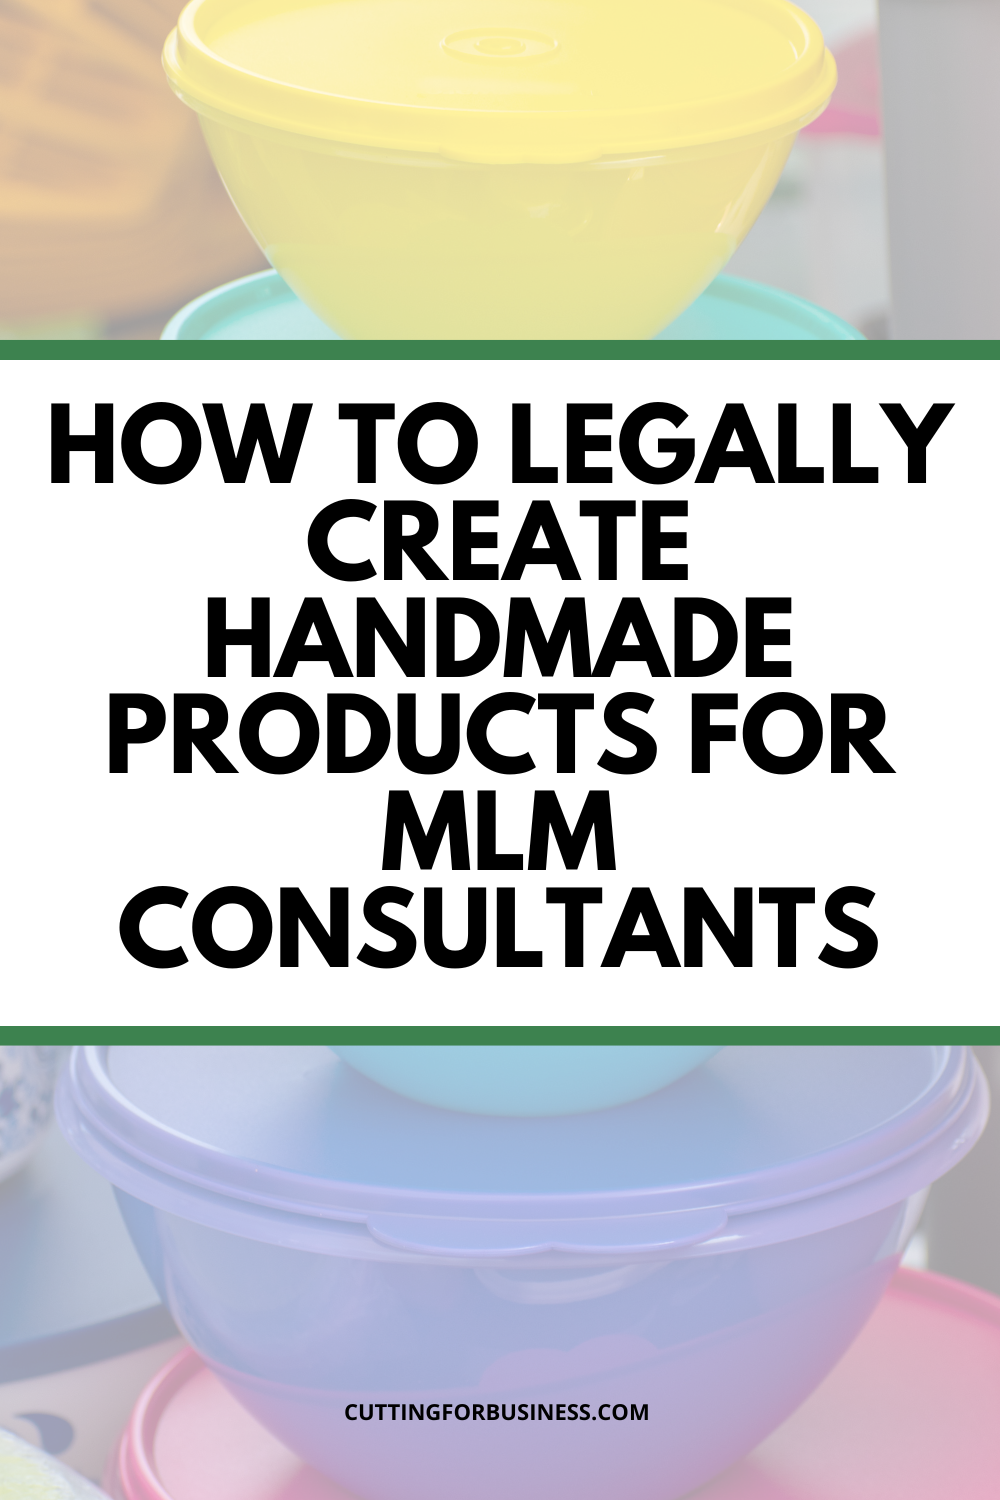 Can You Legally Create Handmade Products for MLM Consultants - cuttingforbusiness.com